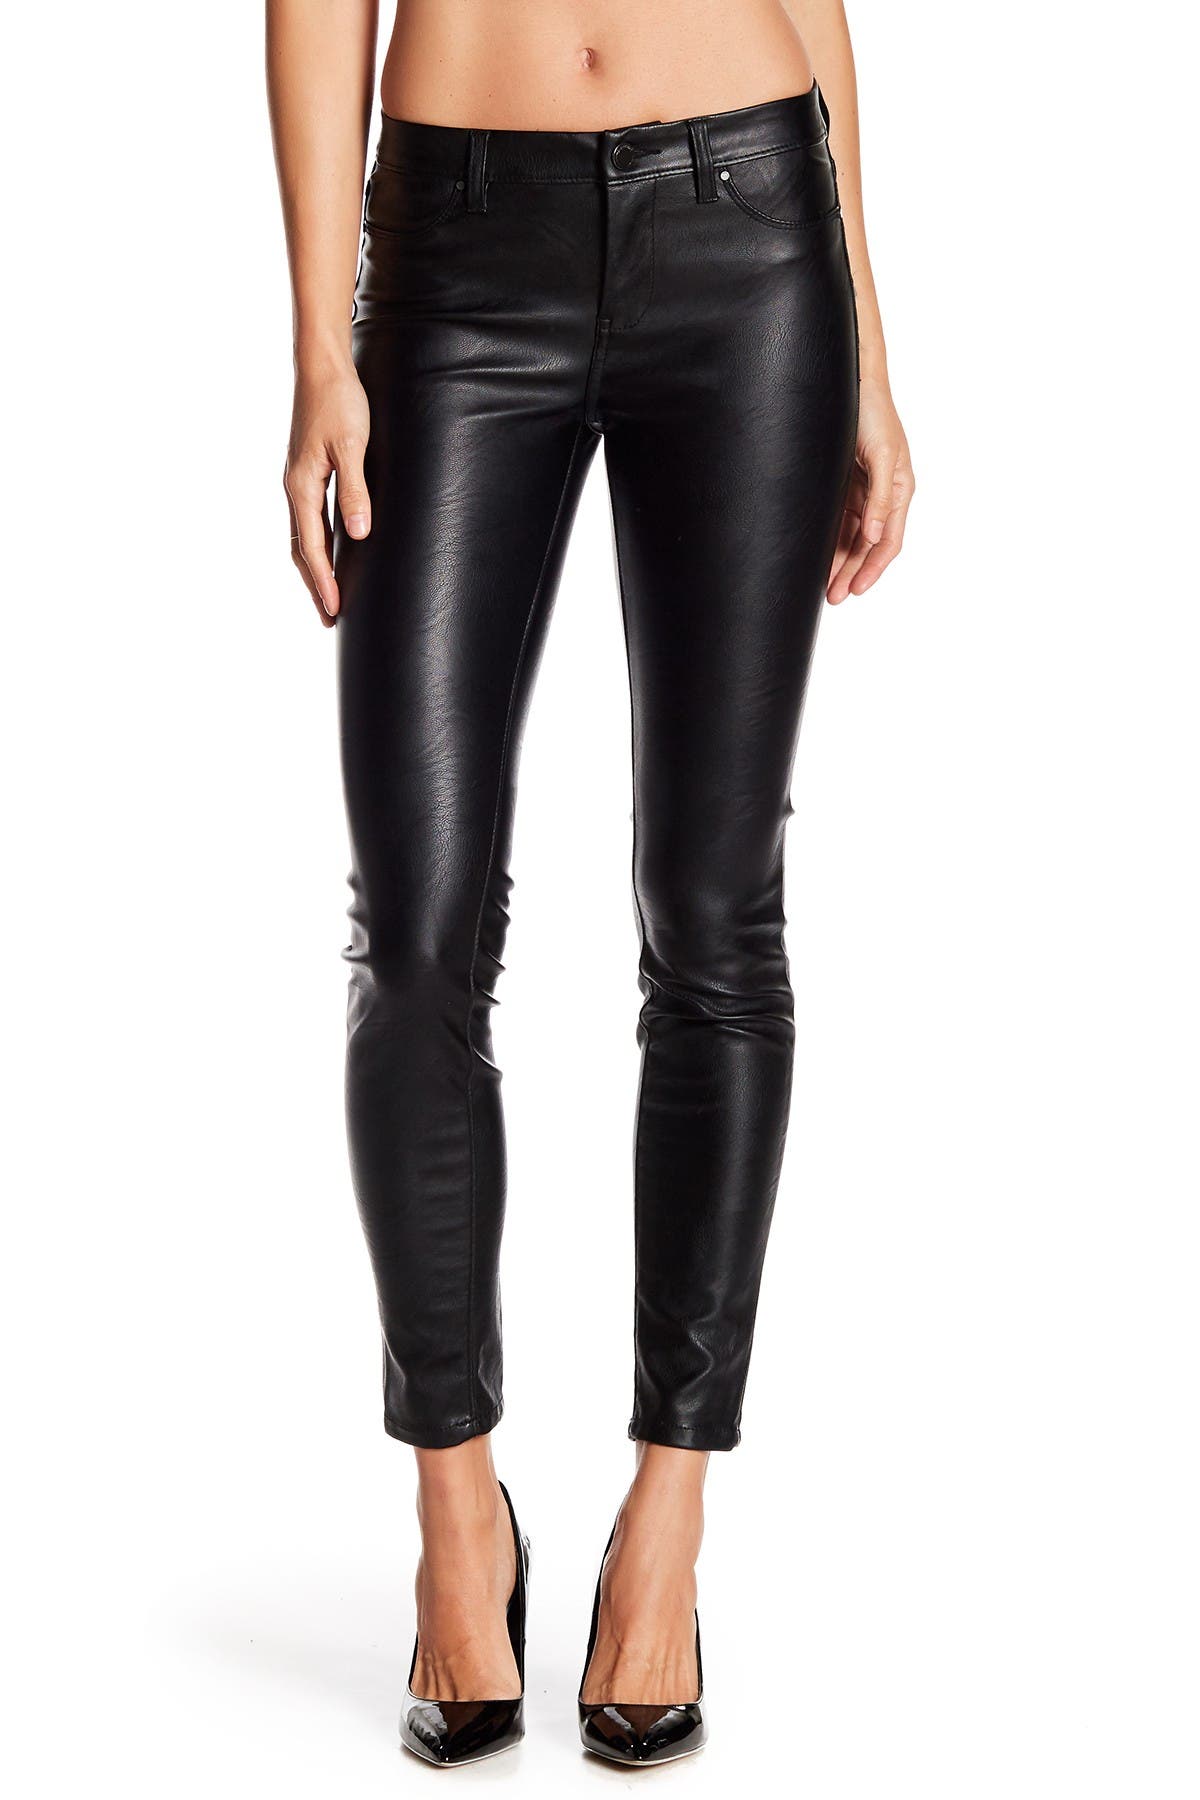 faux leather pants with belt loops